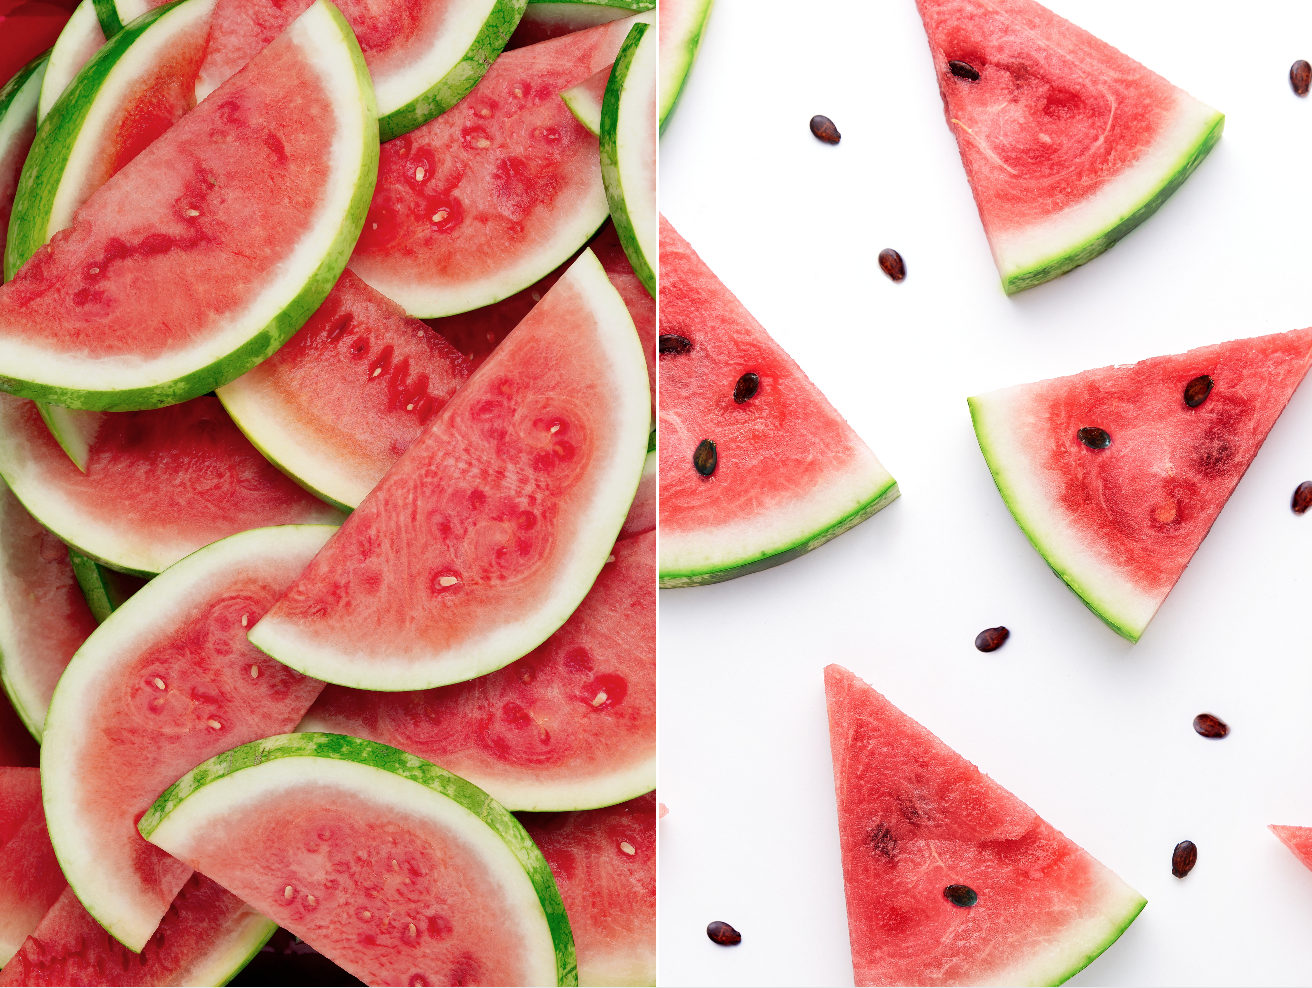 Seedless vs. Seeded Watermelon: What's the Difference? | MyRecipes